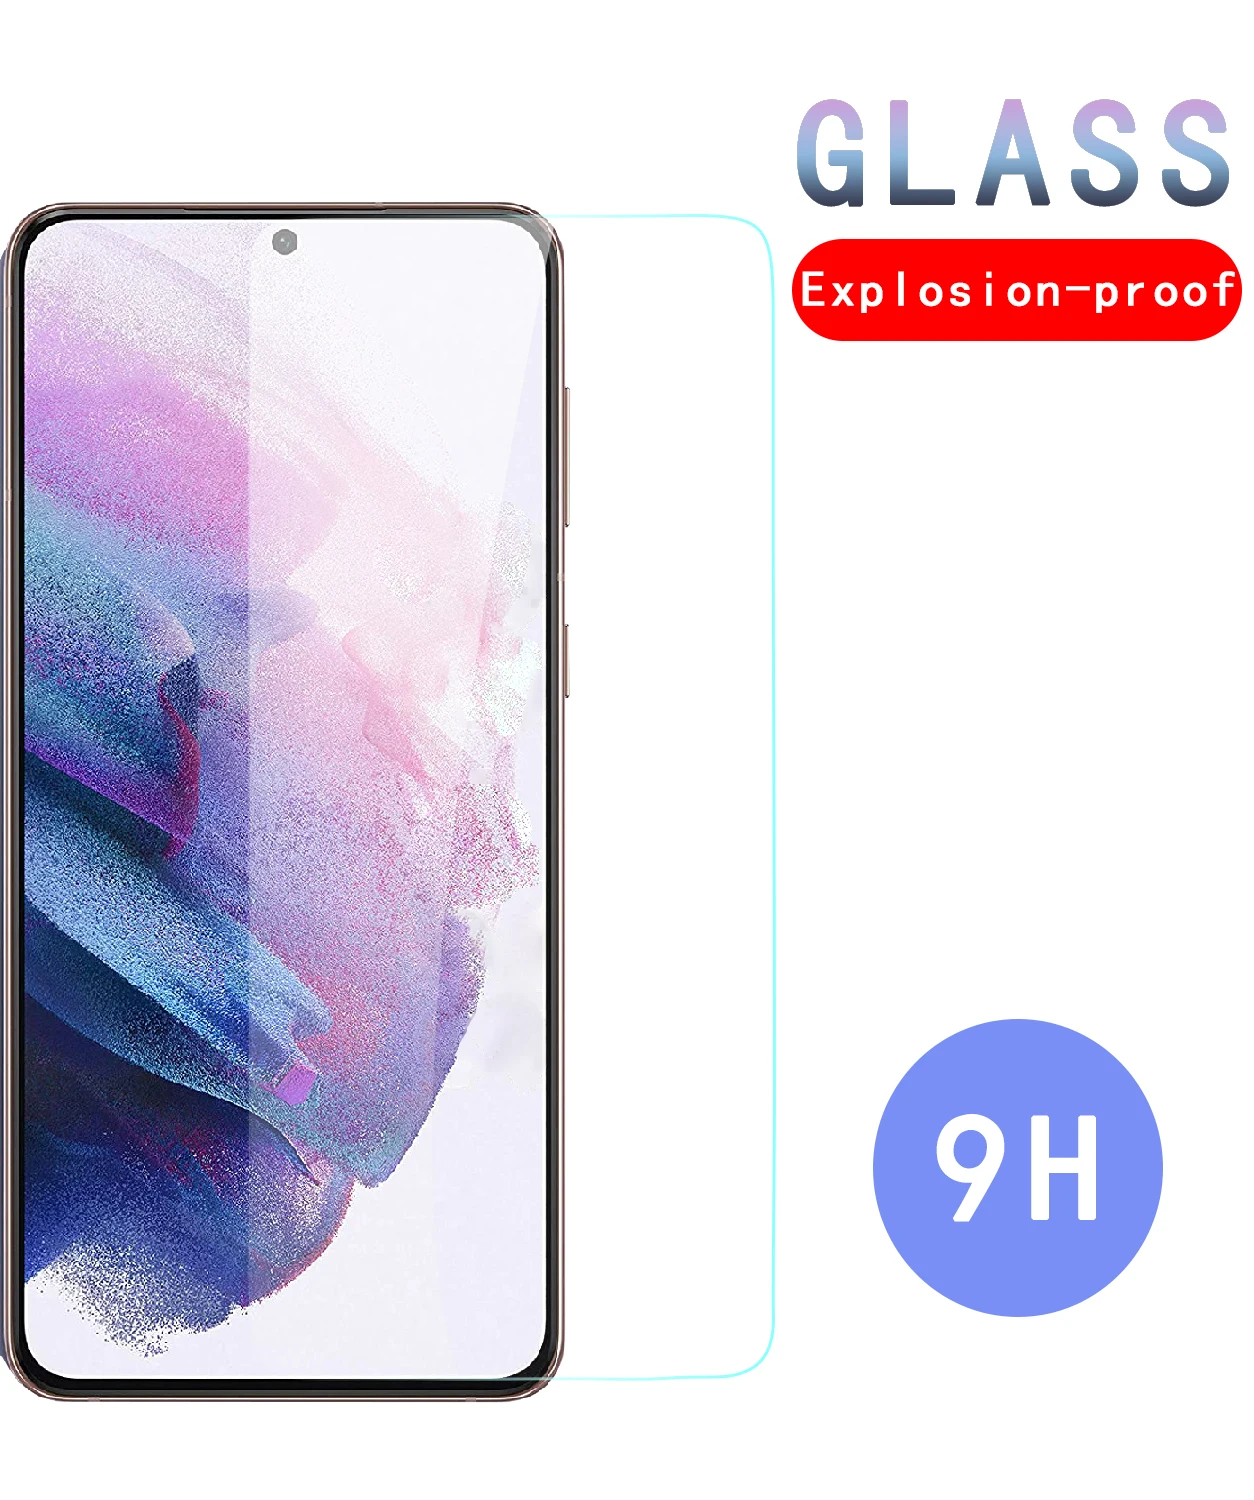 9H Protective Glass For Samsung Galaxy A71 A51 A41 A31 A21S A11 A01 Screen Protector M01 M11 M21 M31 M51 A30 A50 Safety Glass 9h tempered glass for samsung galaxy a01 a11 a21 a31 a41 a51 a71 a21s glass screen protector m01 m11 m21 m31 m51 a10 a50 glass